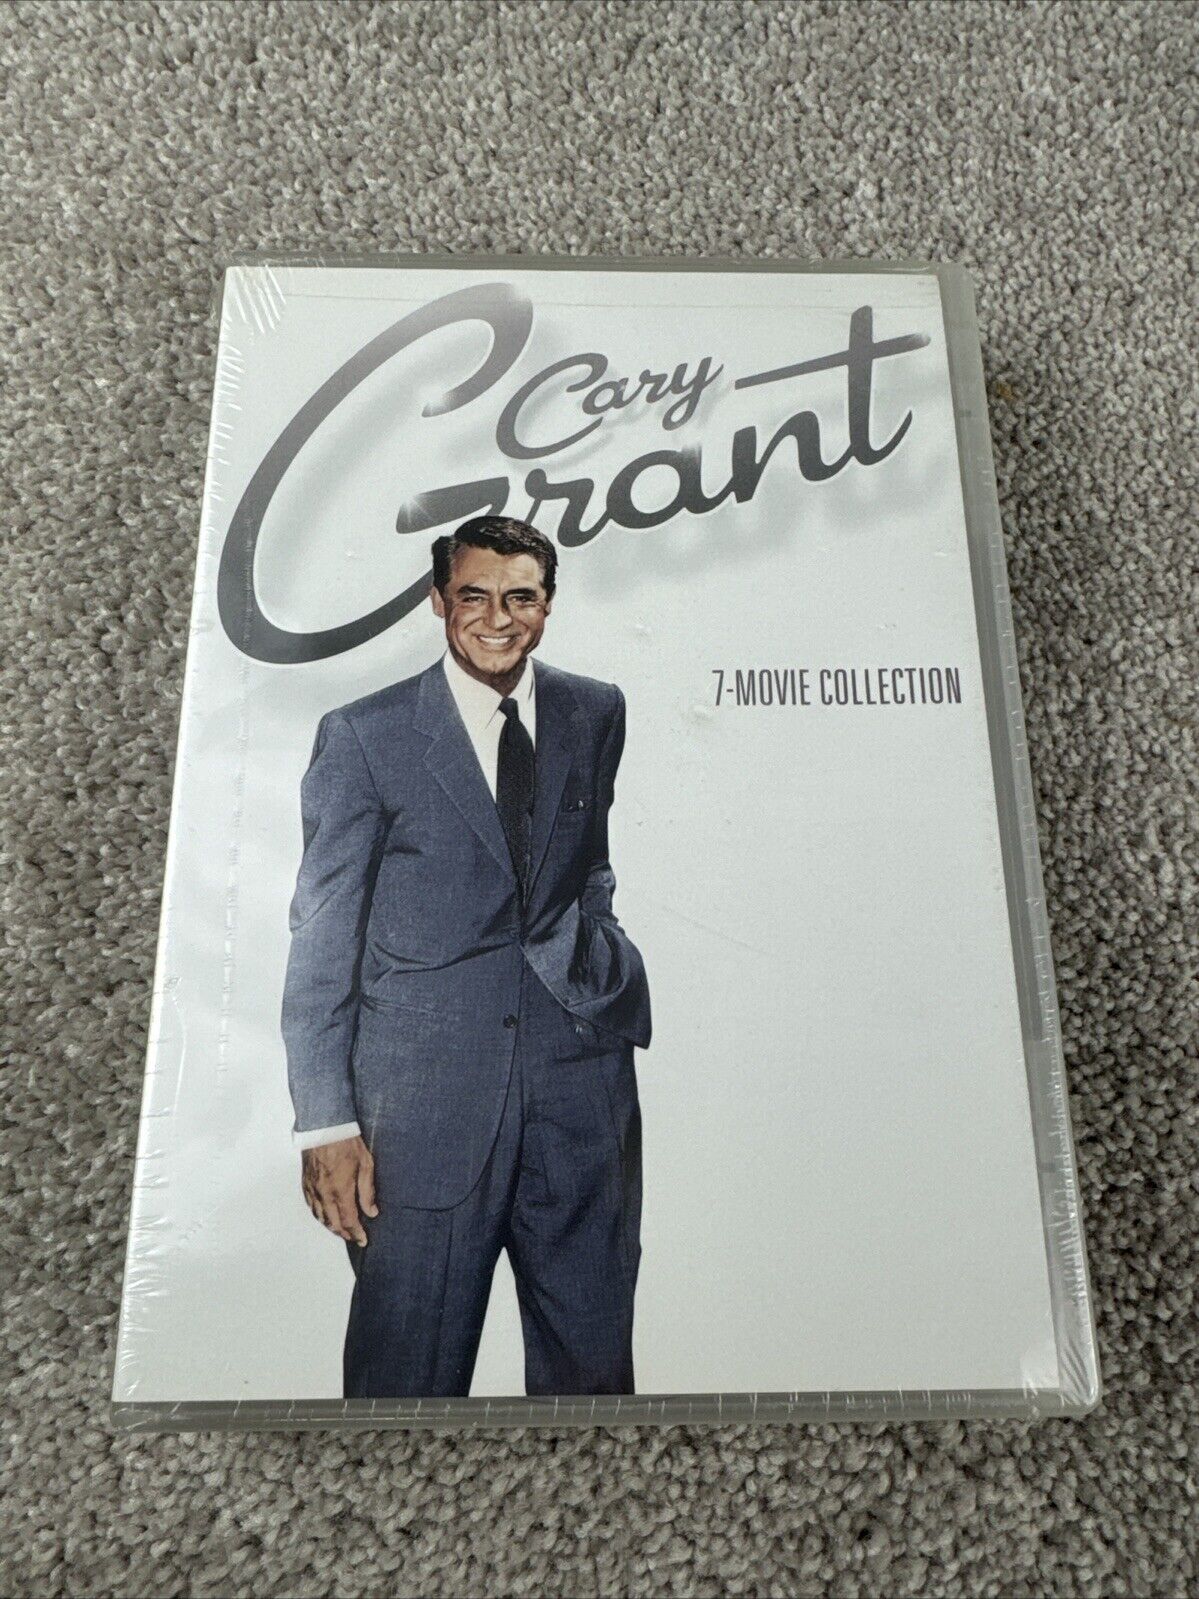 Cary Grant 7 Movie Collection 20th Century - DVD Set classic New SEALED